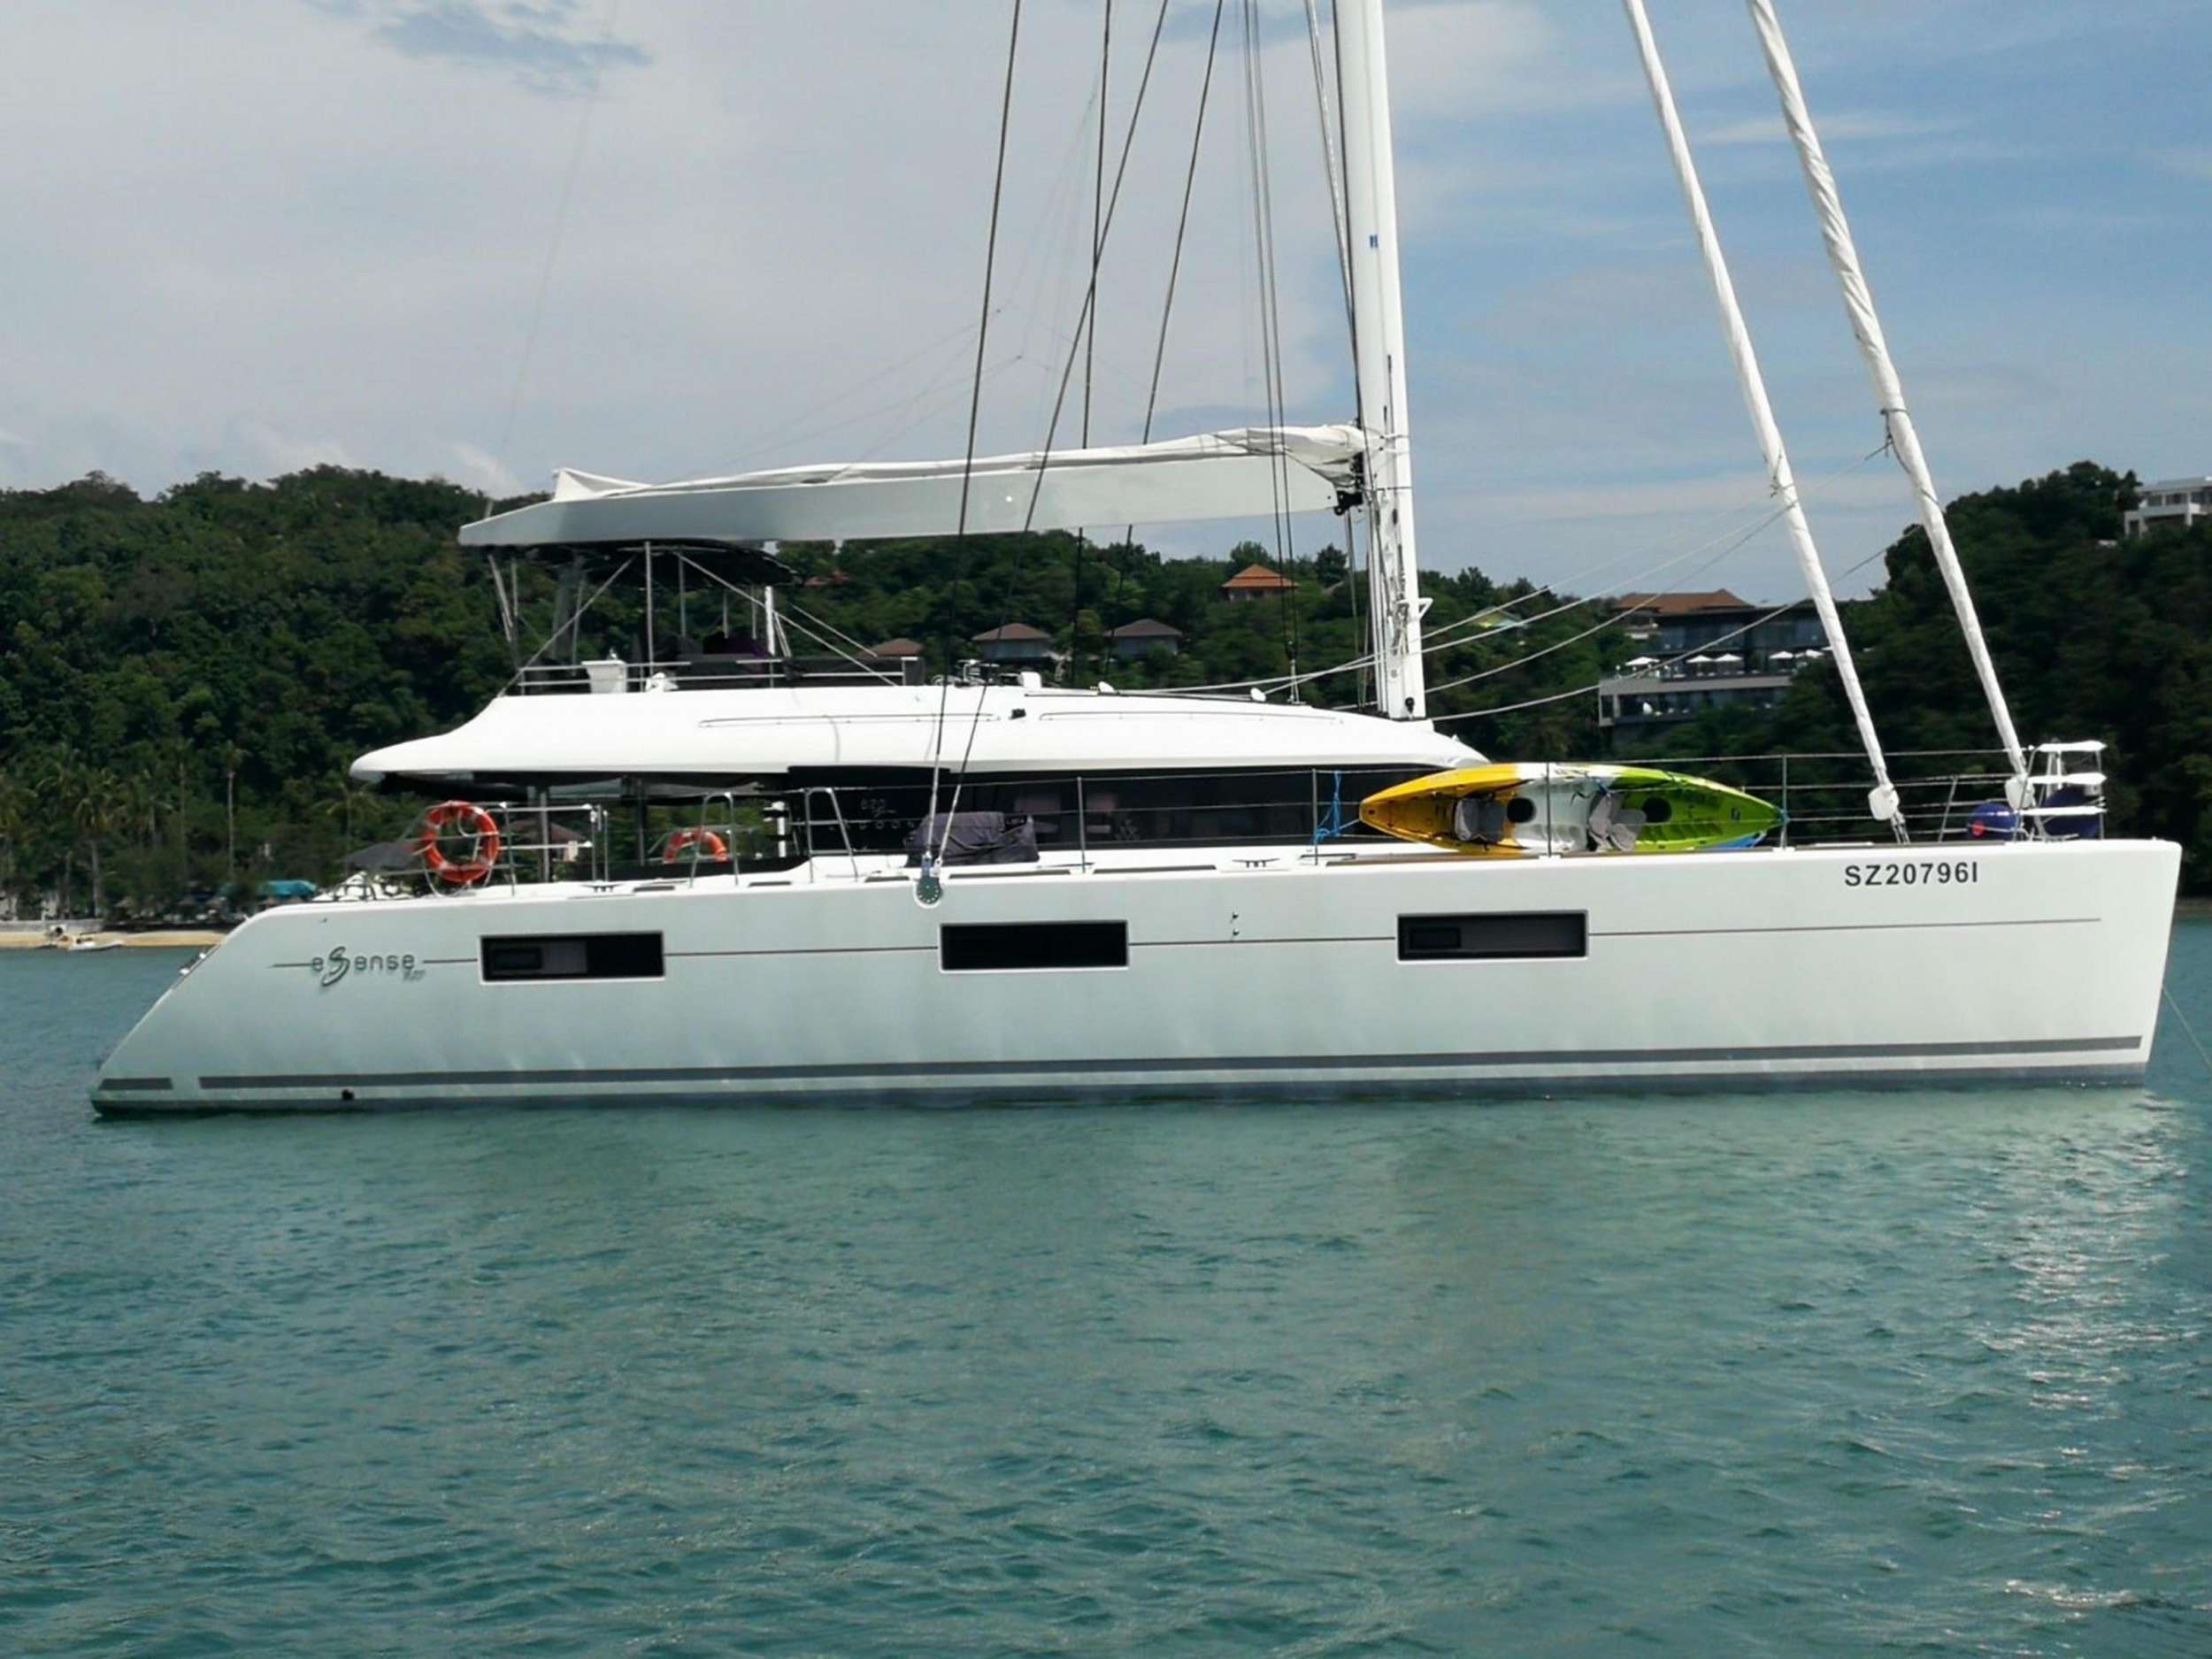 Six Degrees - Yacht Charter Koh Samui & Boat hire in SE Asia 1